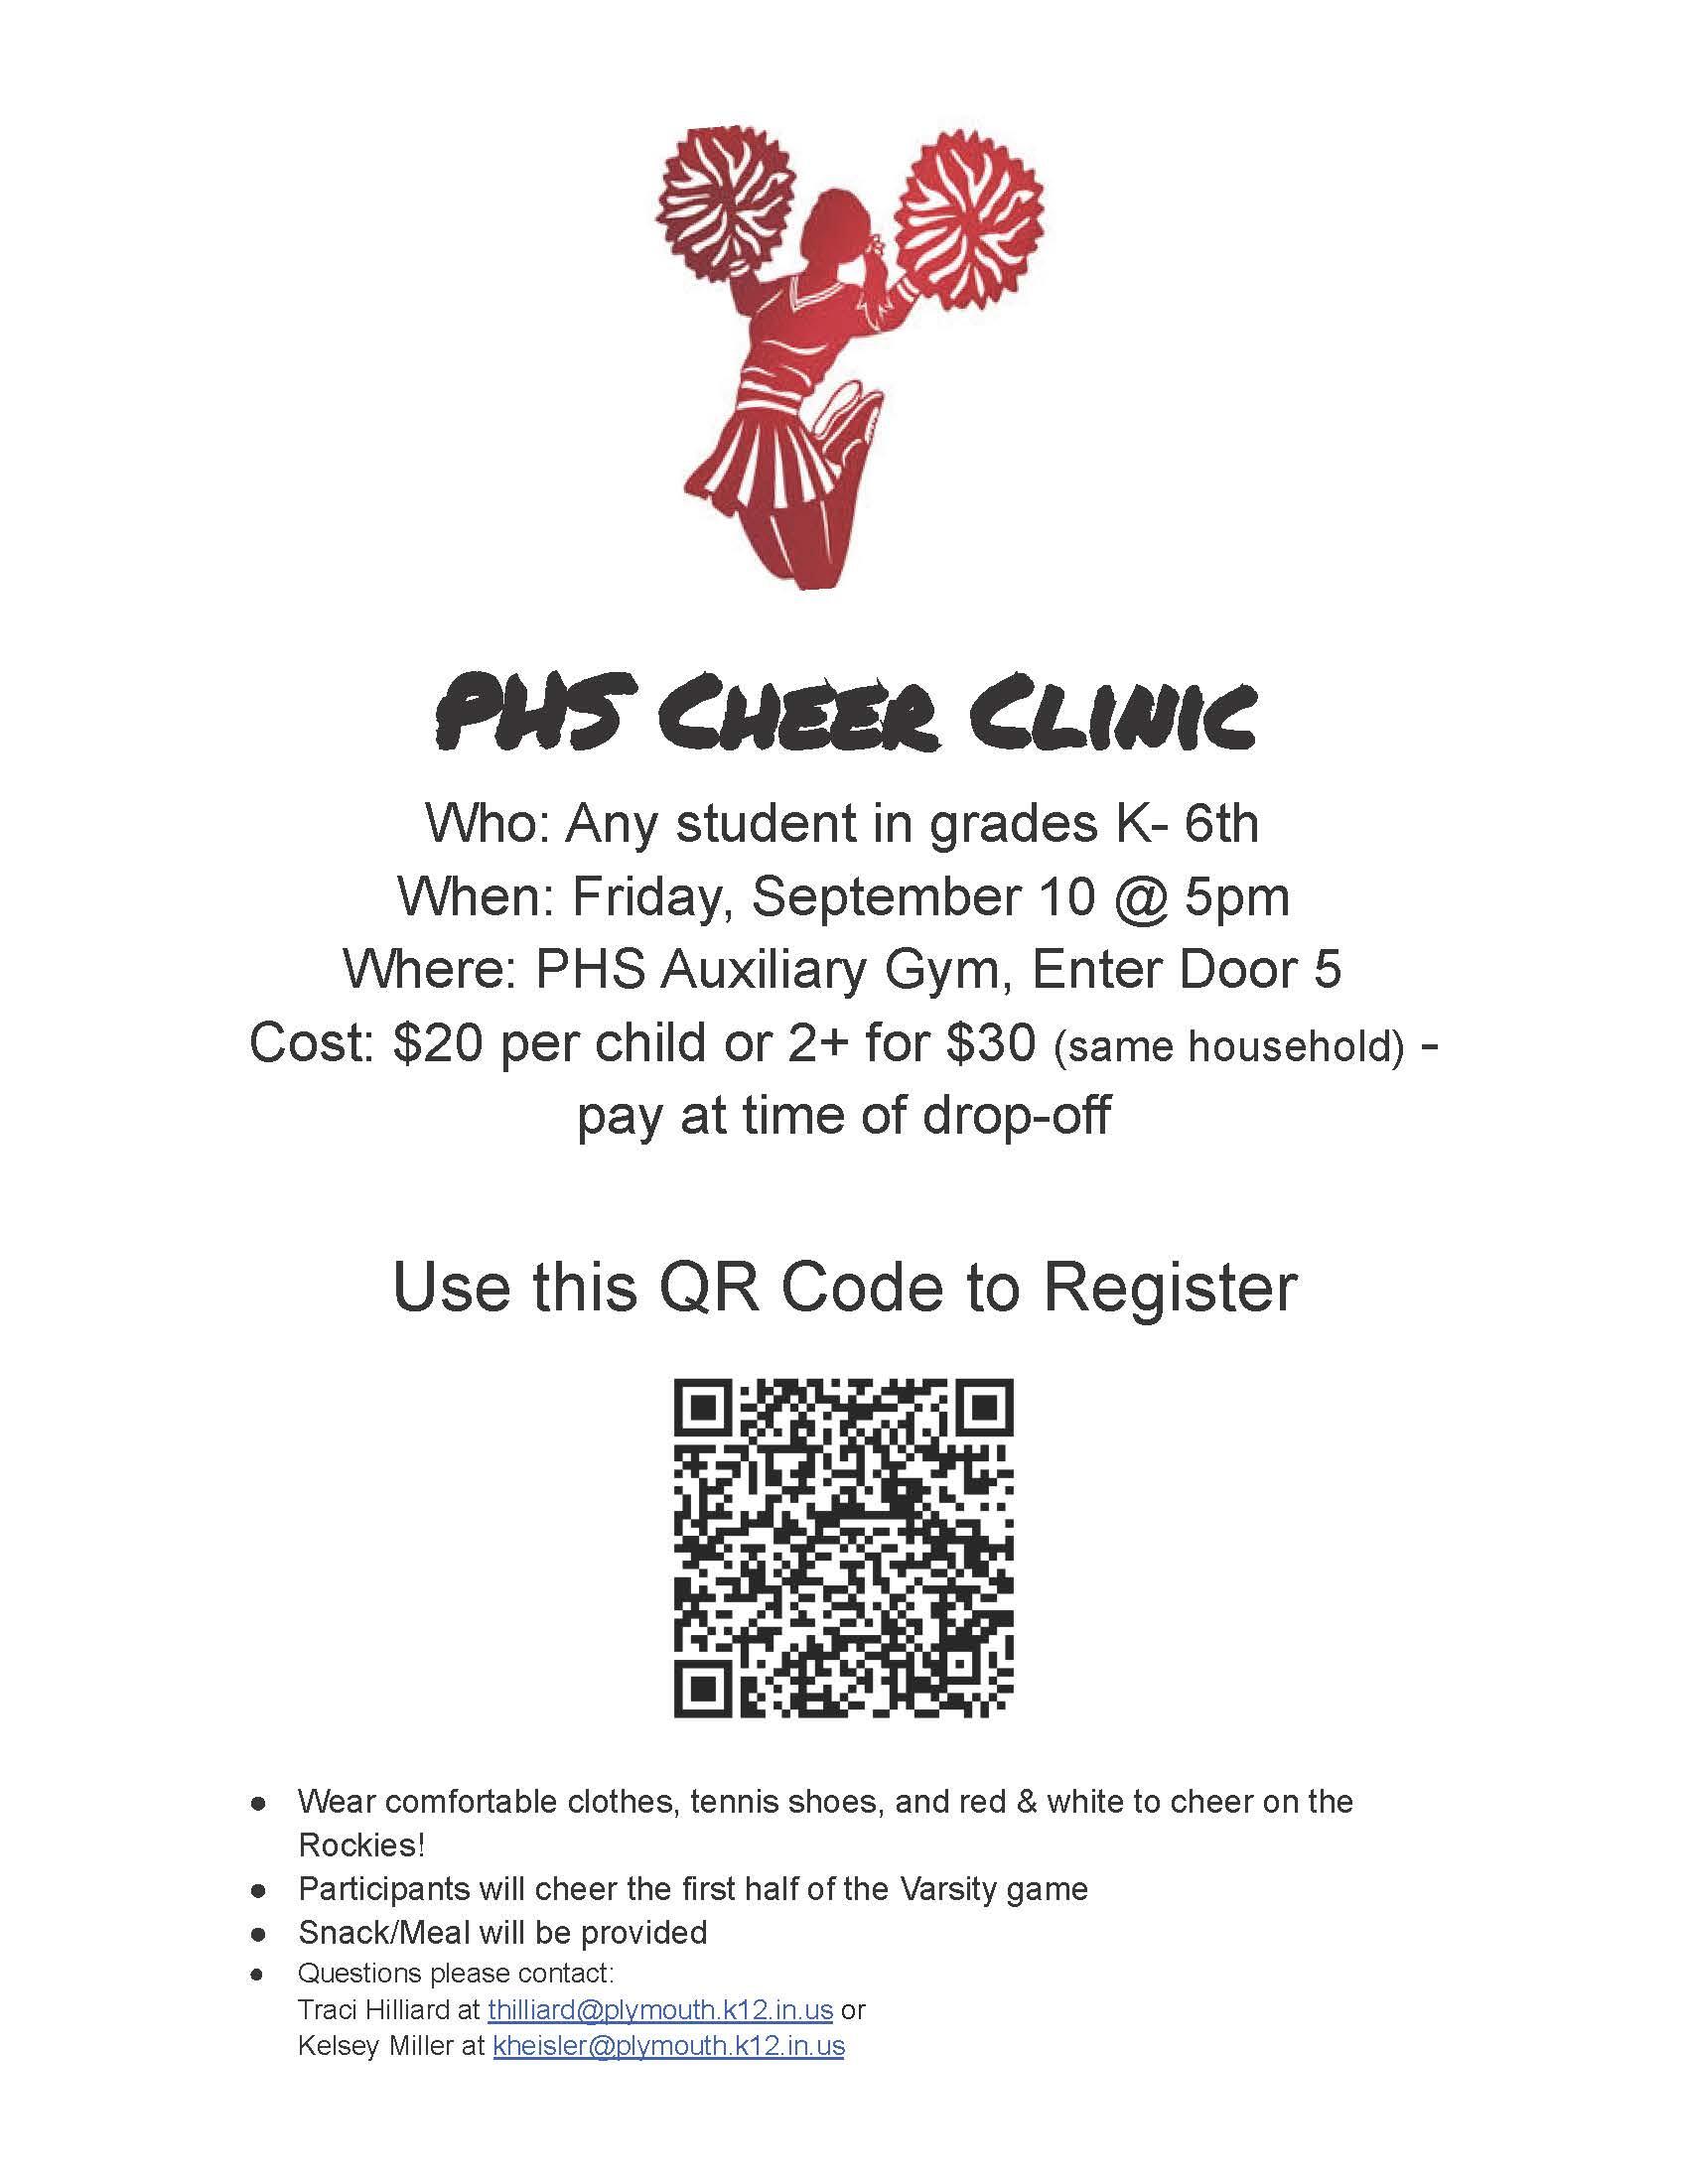 PHS Cheer Clinic Image of Flyer